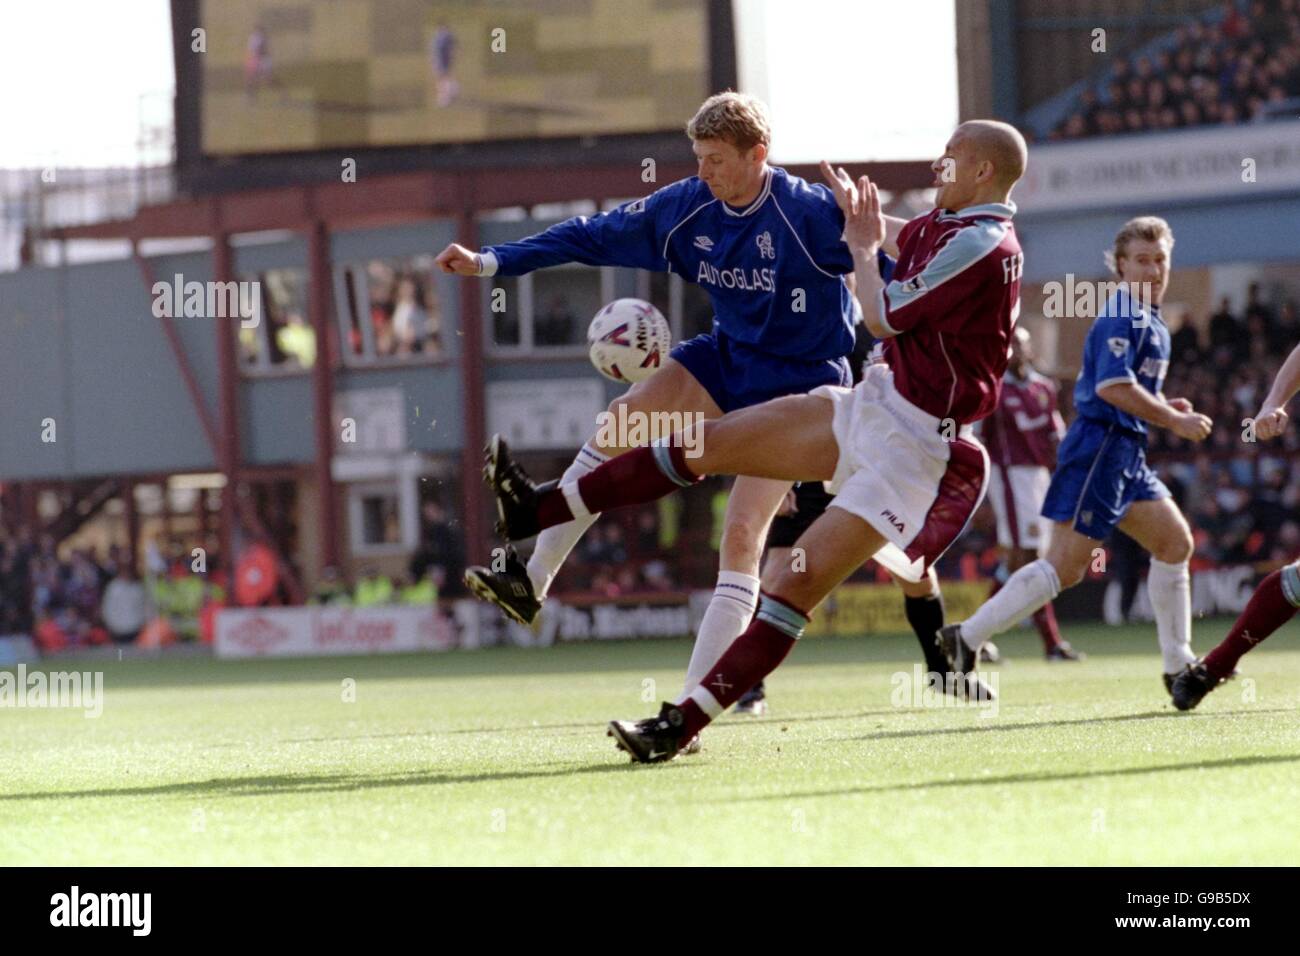 West Ham United's Rio Ferdinand (r) battles for possession of the ball with Chelsea's Tore Andre Flo (l) Stock Photo